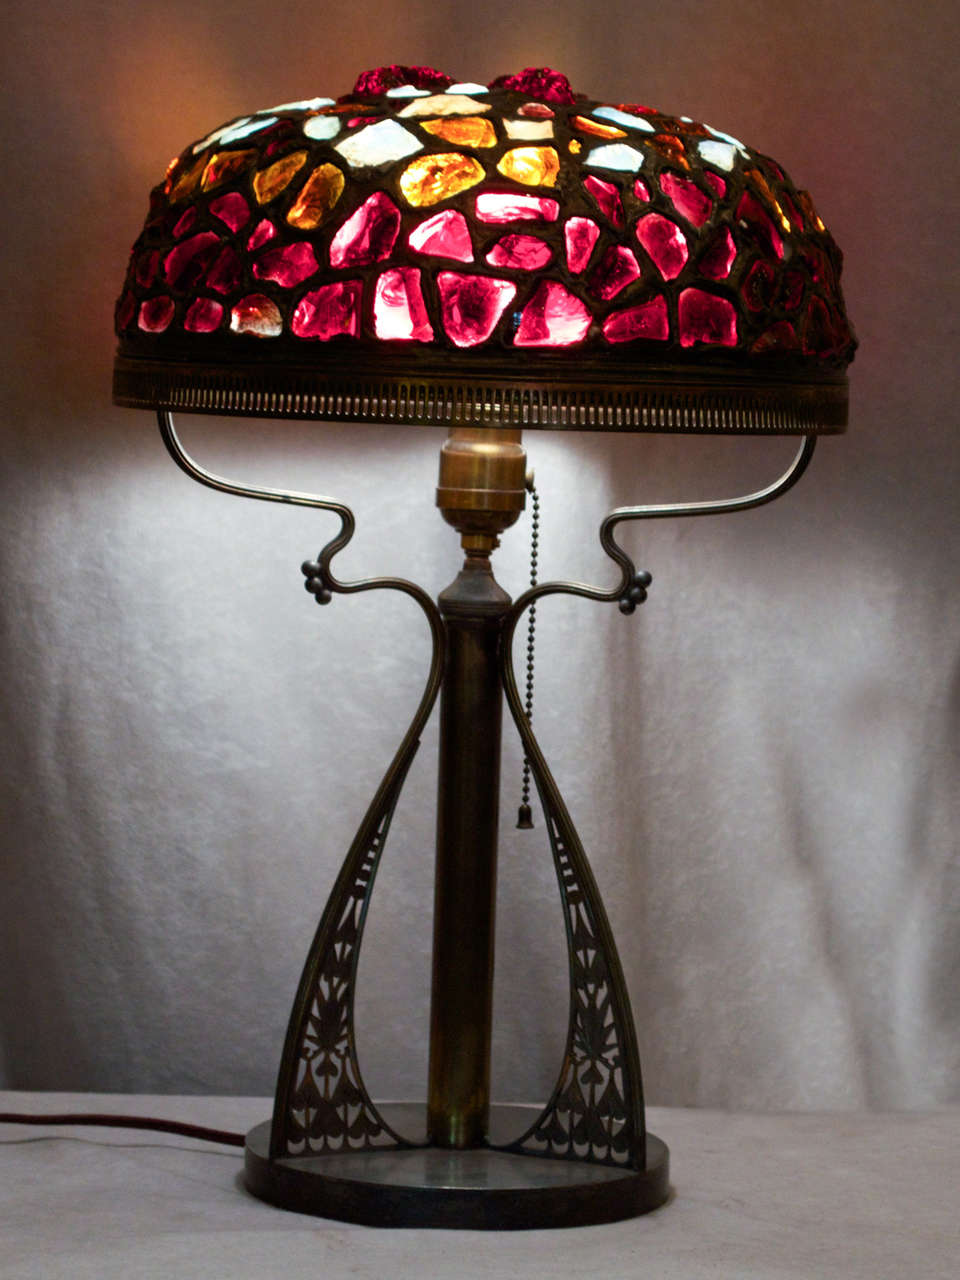 This colorful and exotic shade rests upon a base signed by the Pairpoint Company.  While we bought this lamp as you see it, as far as we know, Pairpoint did not make shades like this.  However, both base and shade are from the same period and the